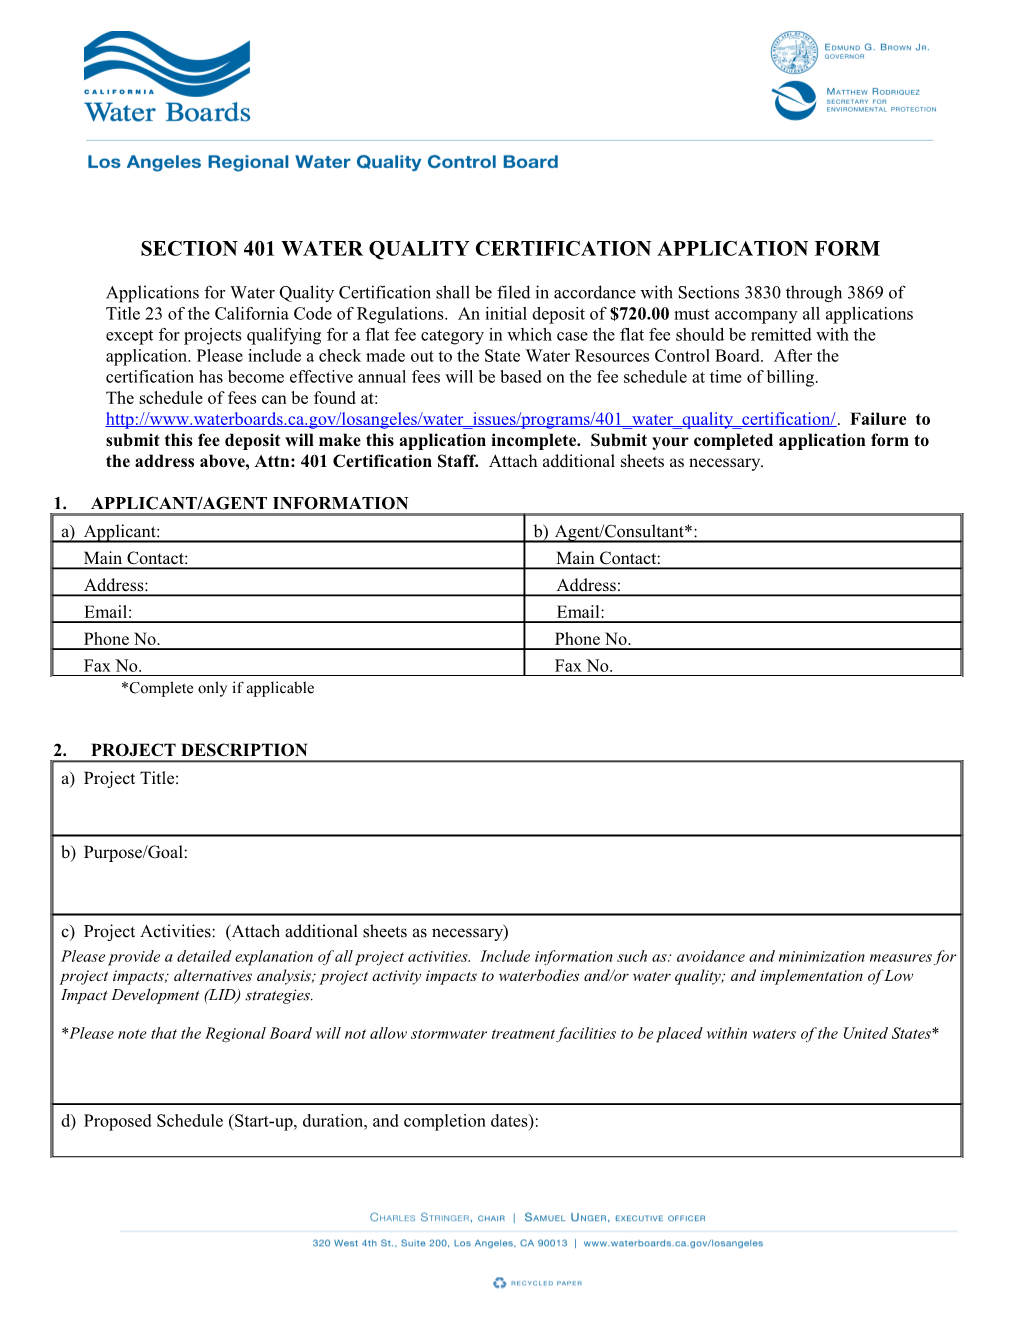 Section 401 Water Quality Certification Application Form